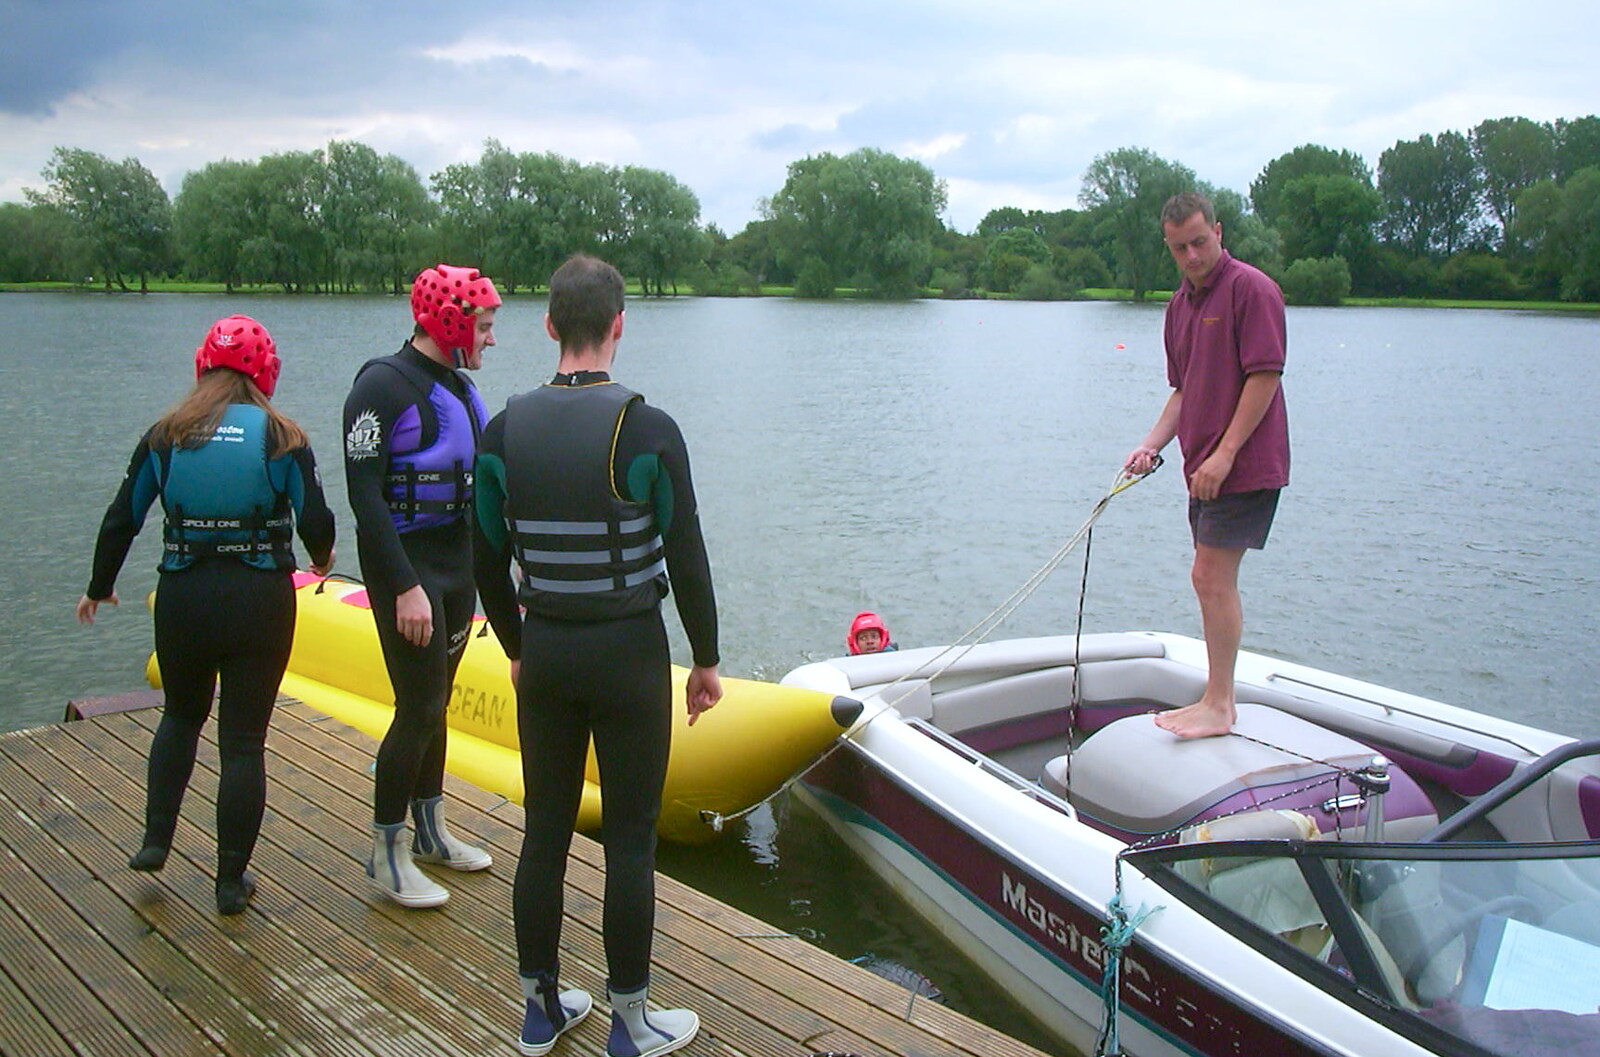 3G Lab Watersports Fun Day, Wyboston, Bedfordshire - 8th June 2002: The banana boat is readied for another trip